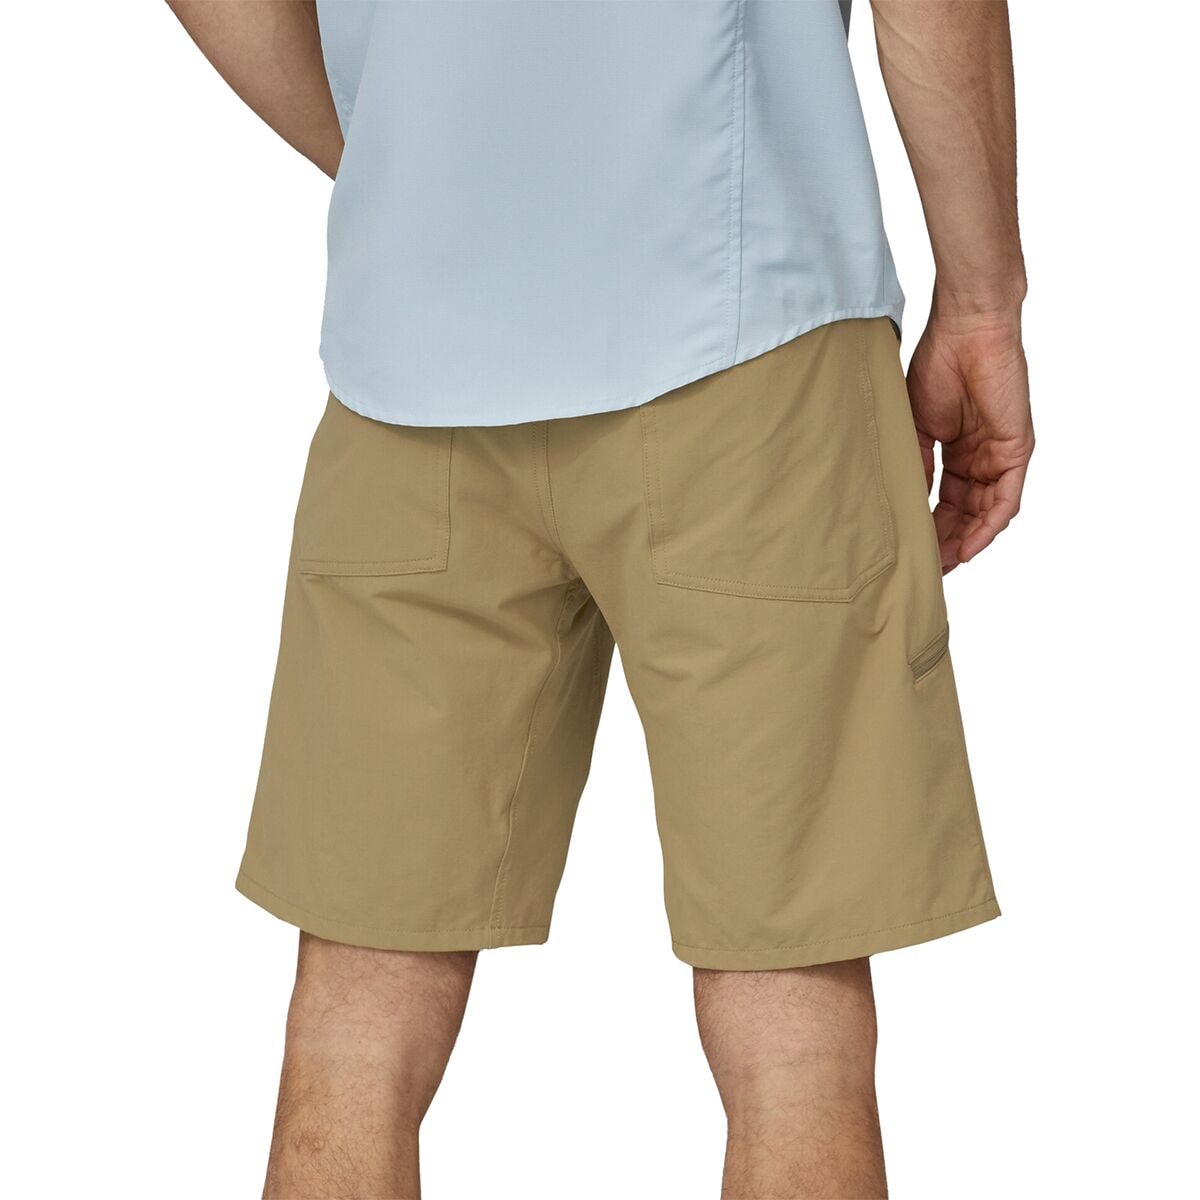 Best Hiking Shorts (Review & Buying Guide) in 2023 - Task & Purpose